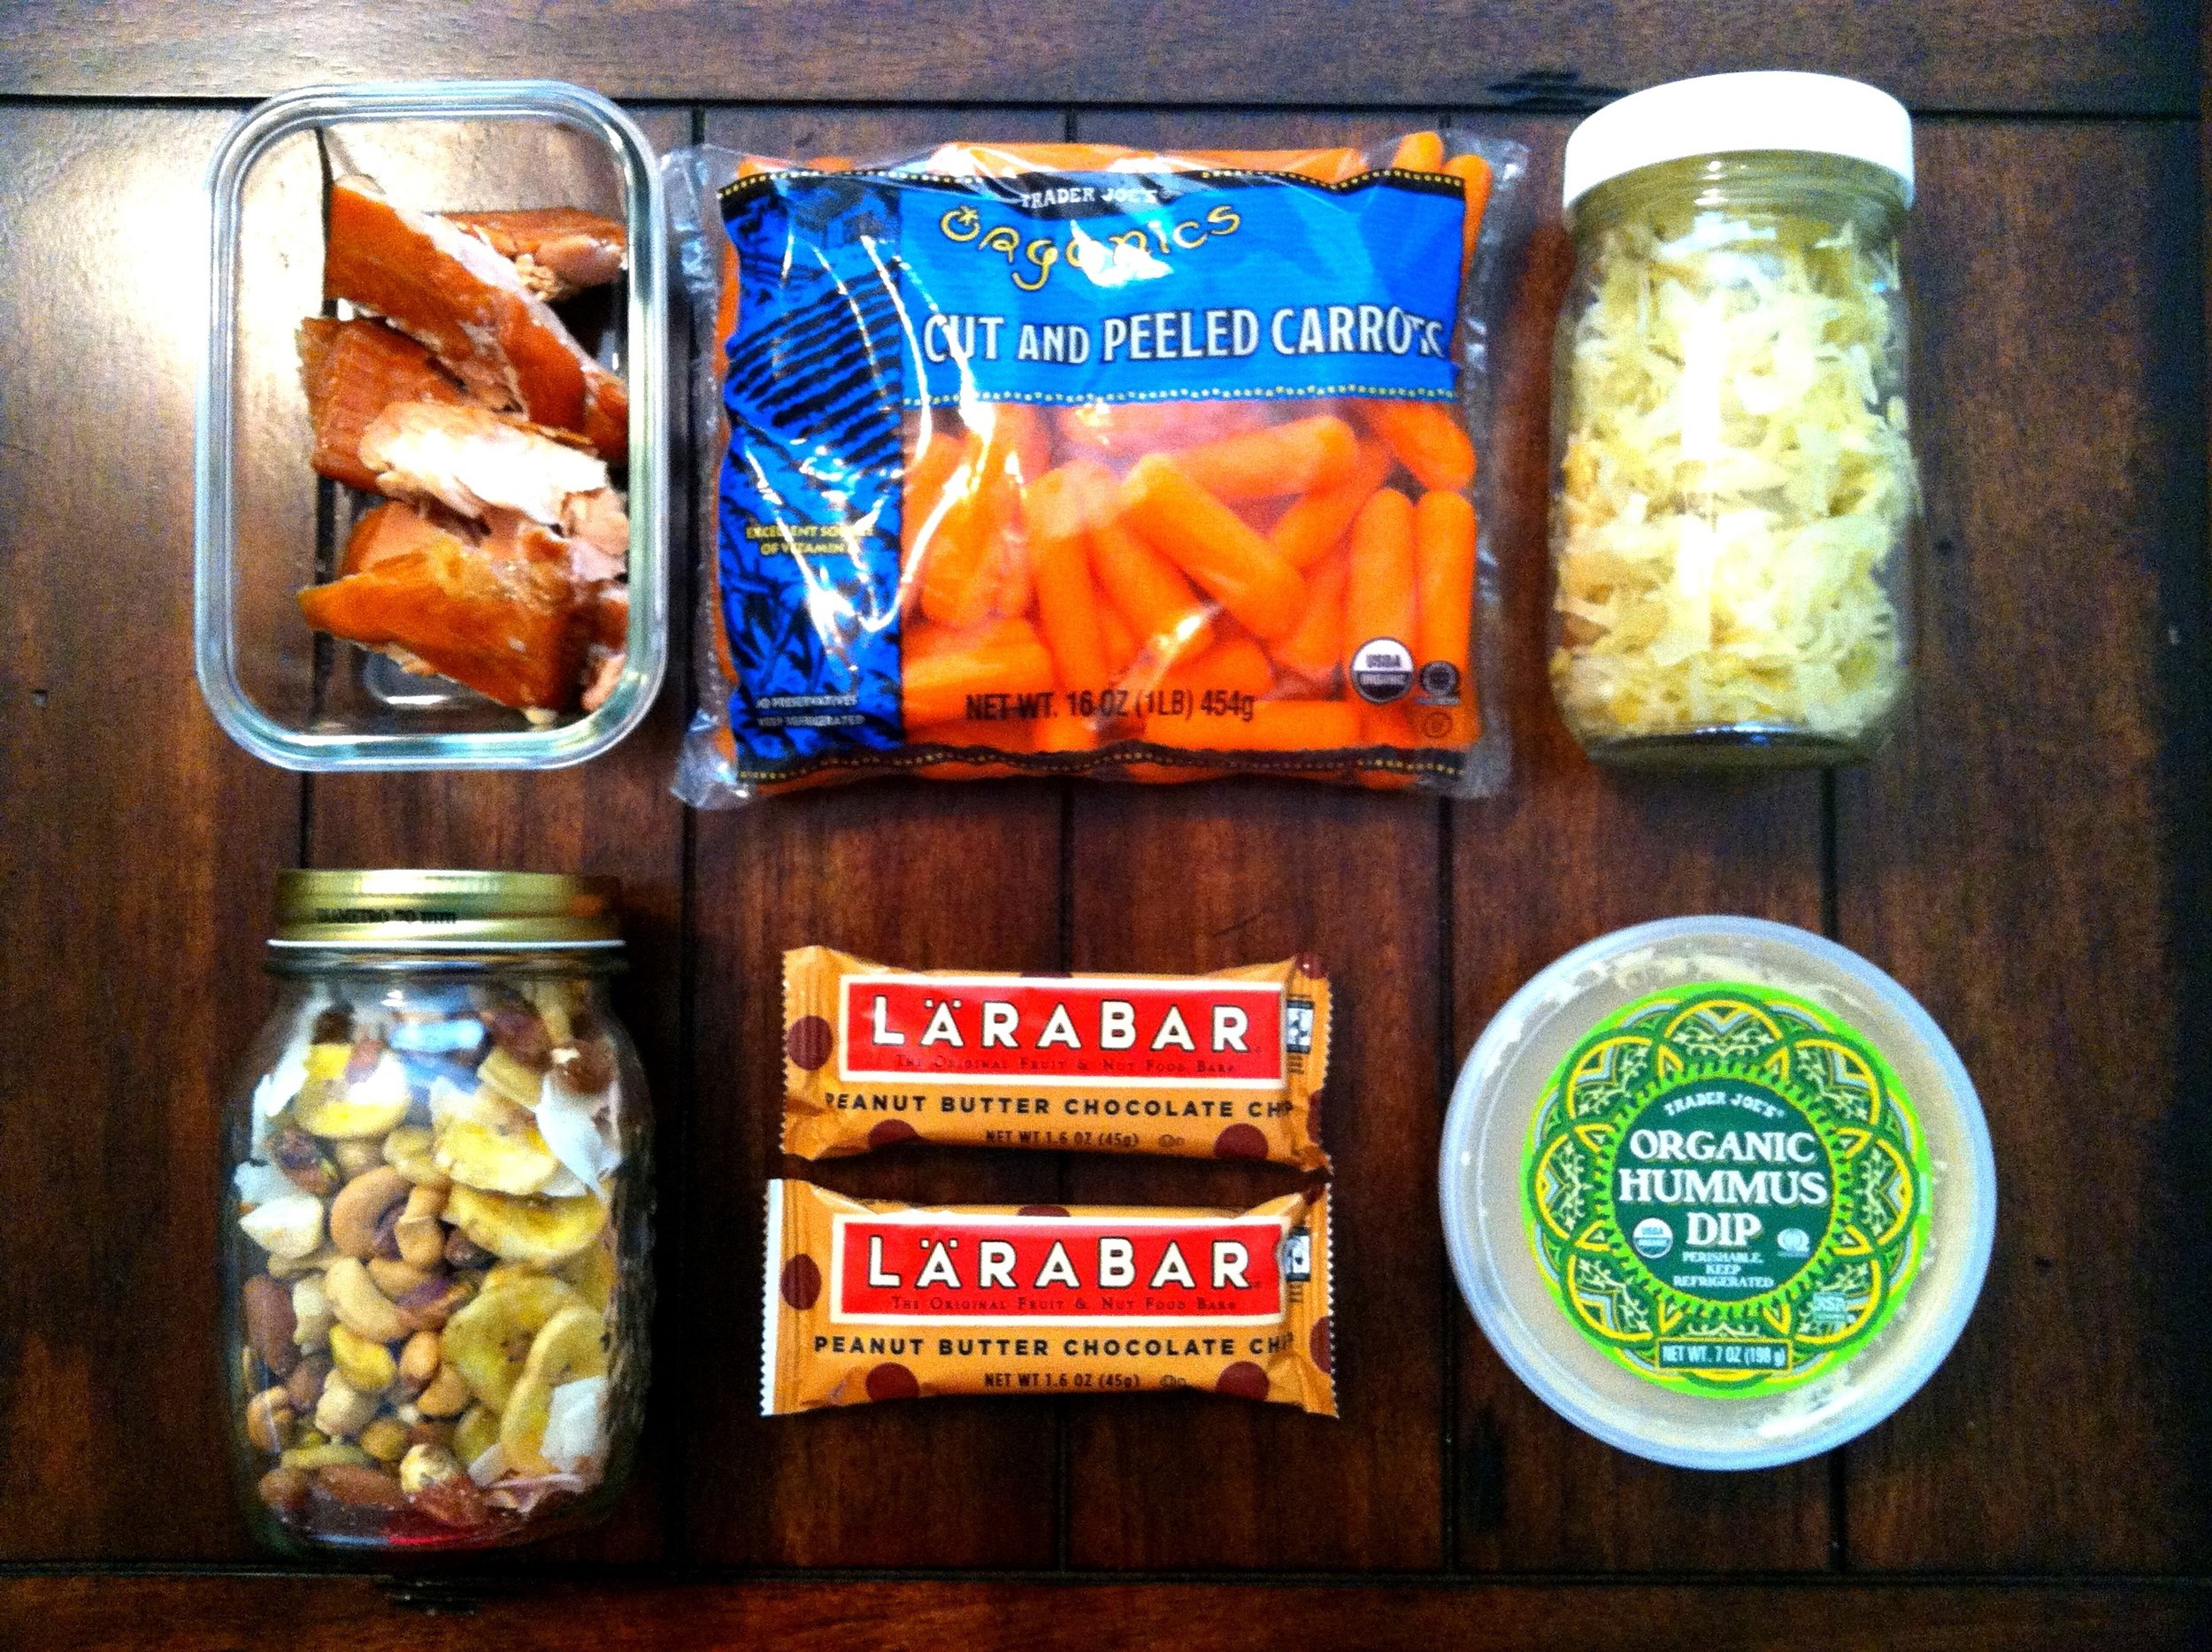 This trips's goodies include {from top left} smoked salmon, organic carrots, sauerkraut, mixed nuts with banana chips and unsweetened coconut, Larabars {this is our "sweet treat"} and organic hummus from TJ's {this is also a treat for the hubs as we don't usually do many beans}. We also have grass-fed beef jerky, apples and hard boiled eggs. Let's just put it this way- if we had to sit in traffic the entire weekend, we'd be well fed. 